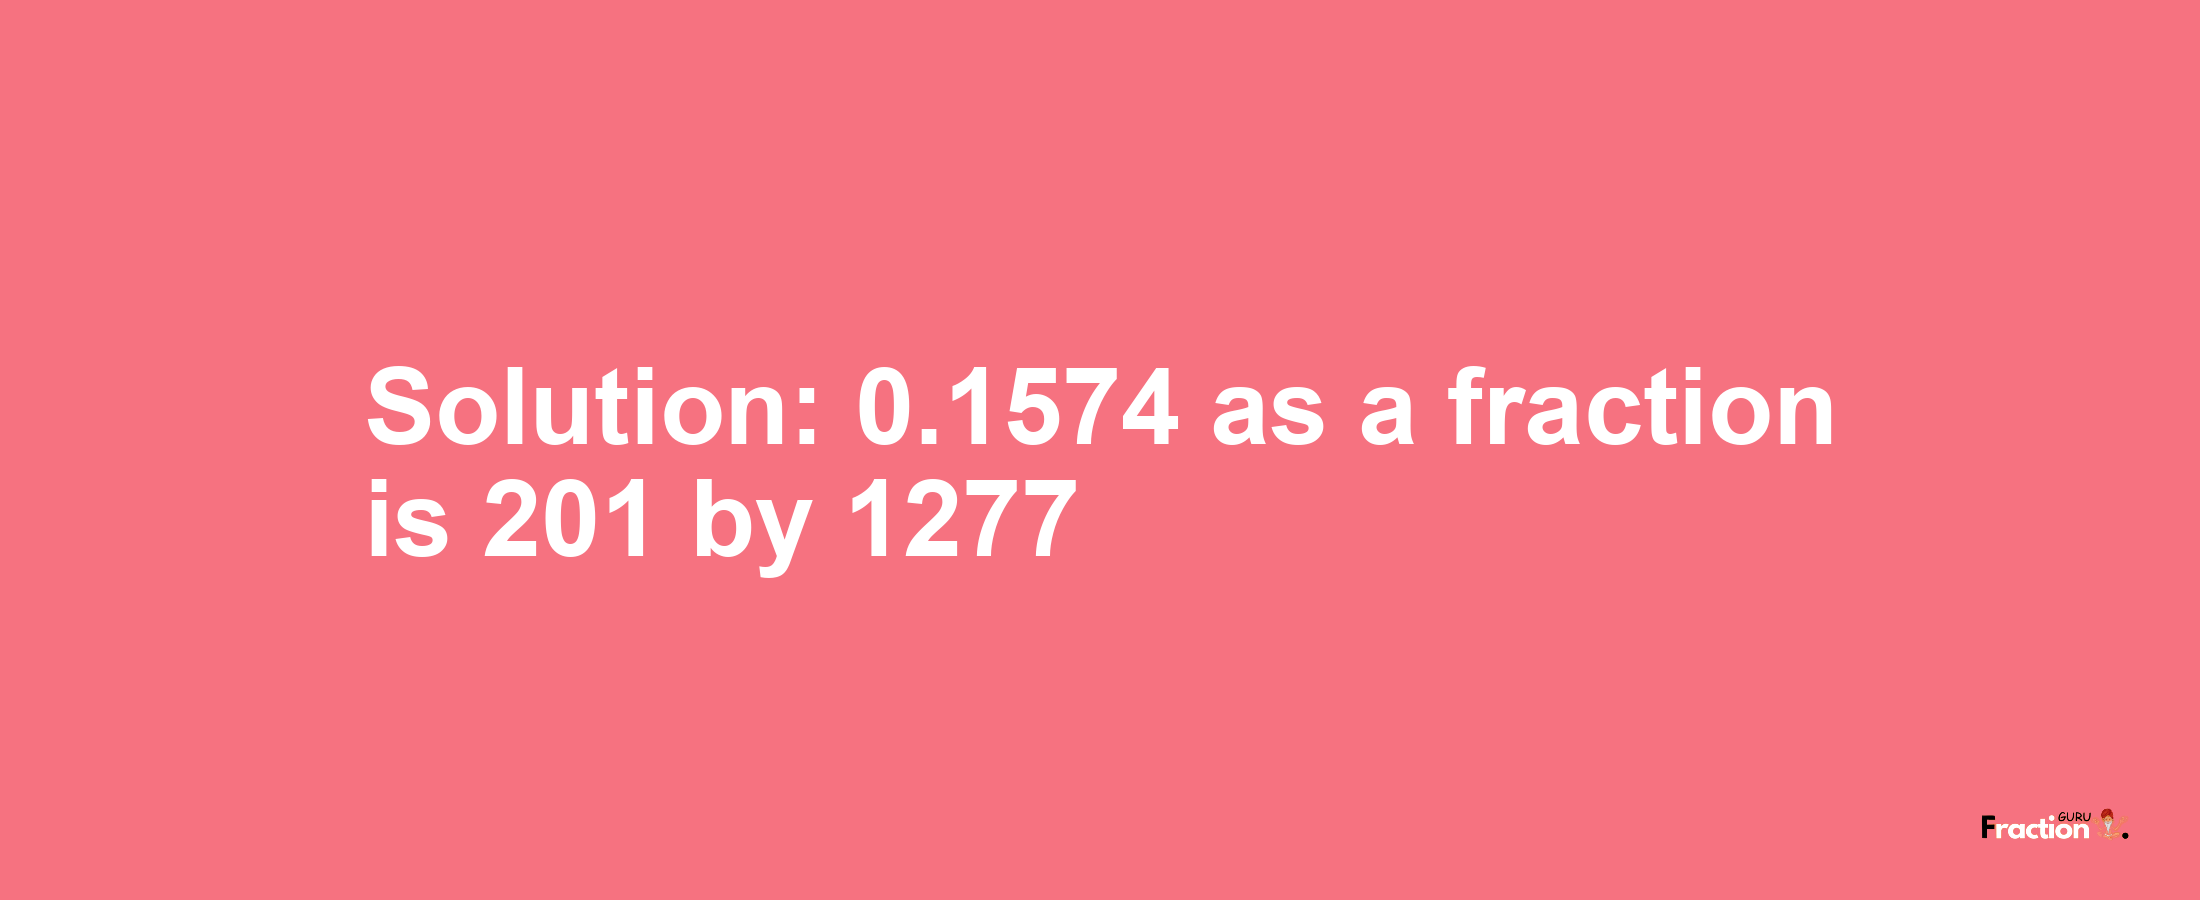 Solution:0.1574 as a fraction is 201/1277